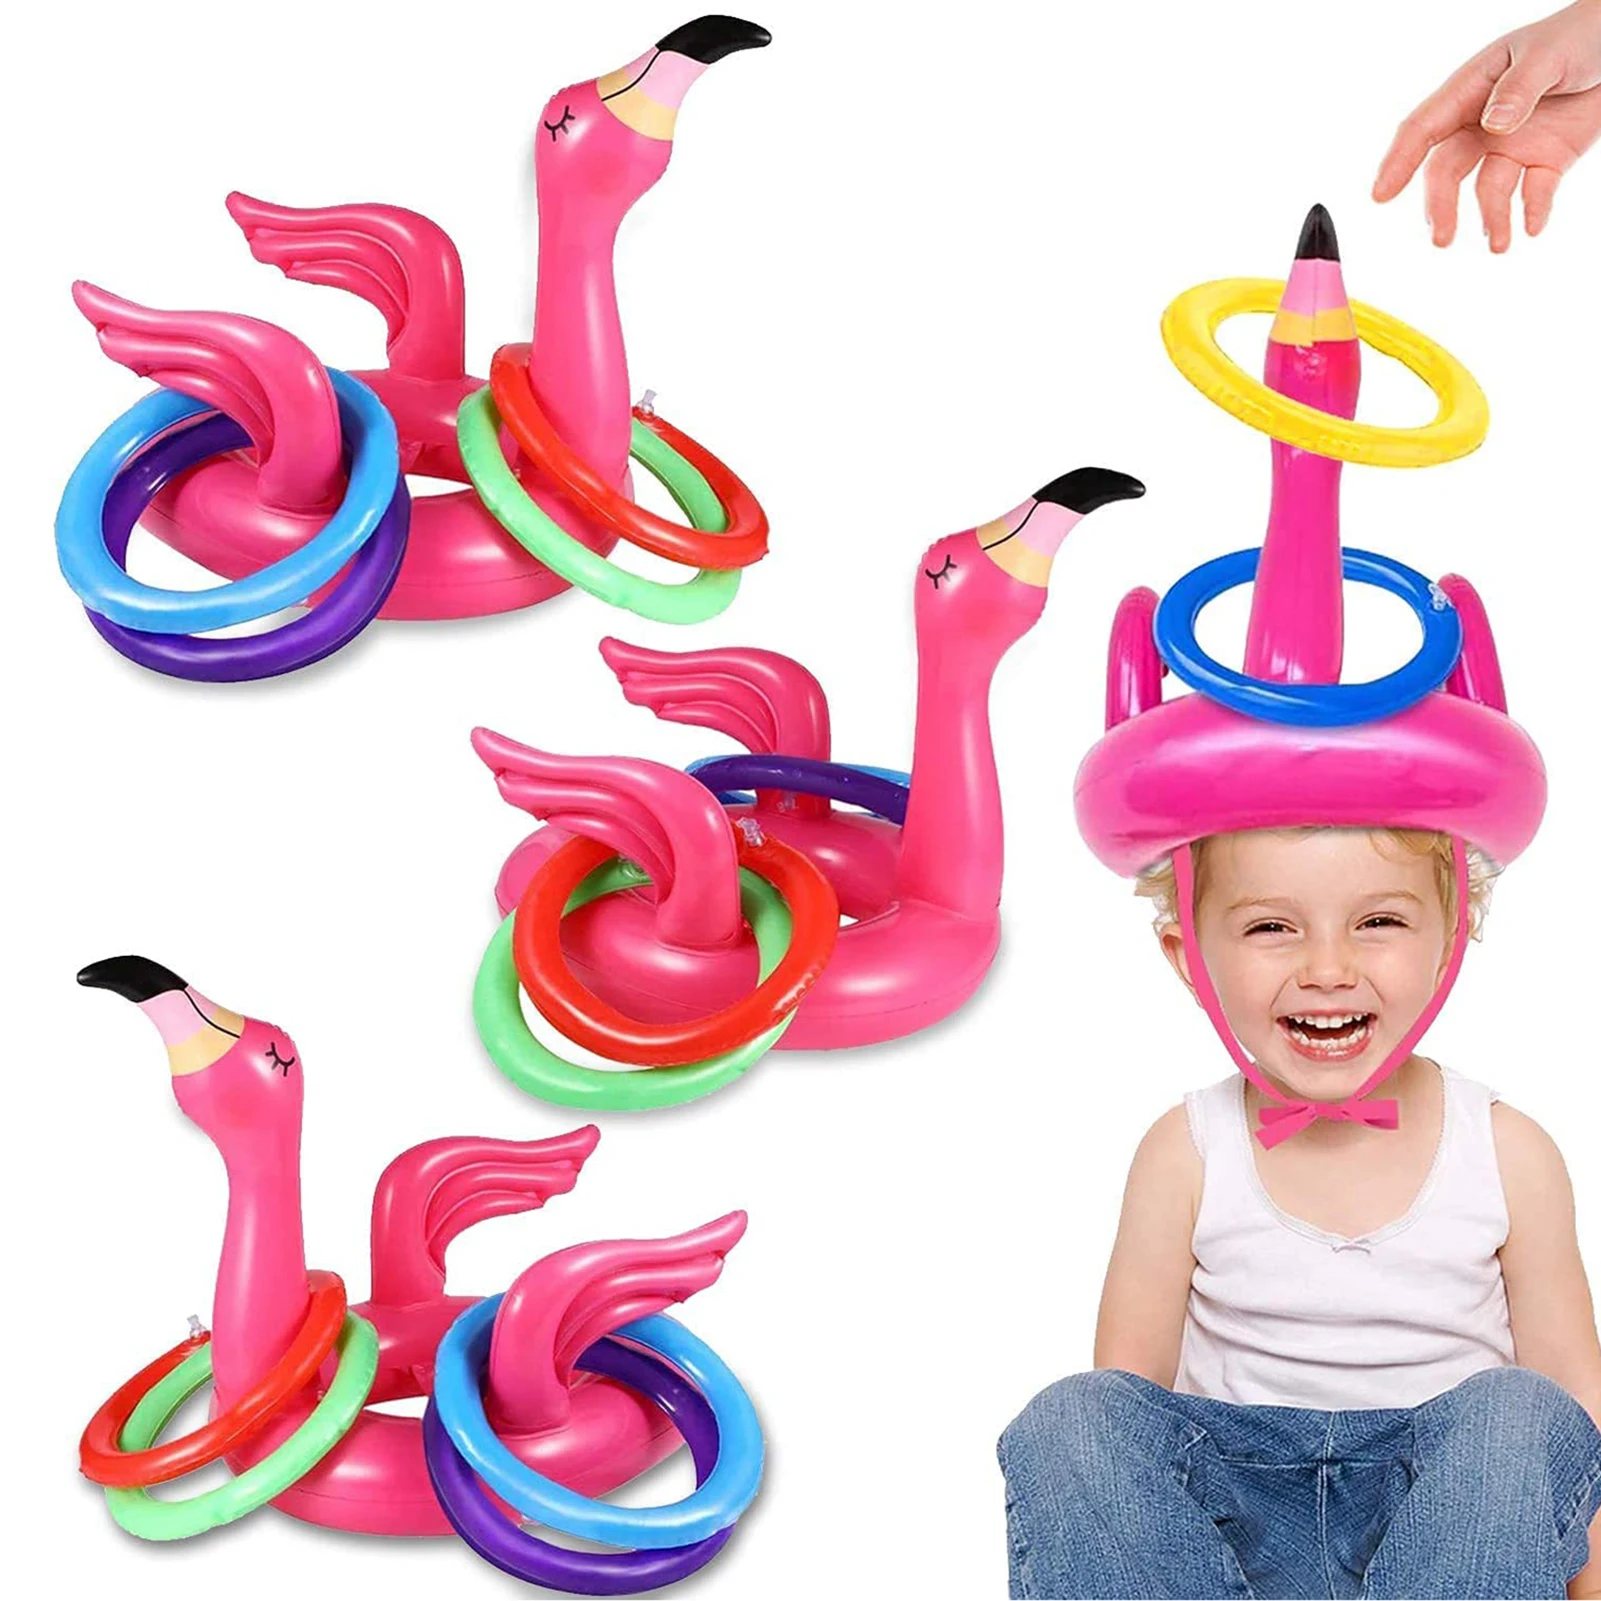 Portable Iatable Flamingo Head Hat With 4Pcs Toss Rings Water Game For Family Party Pink PVC Material Outdoor Pools Fun Toys